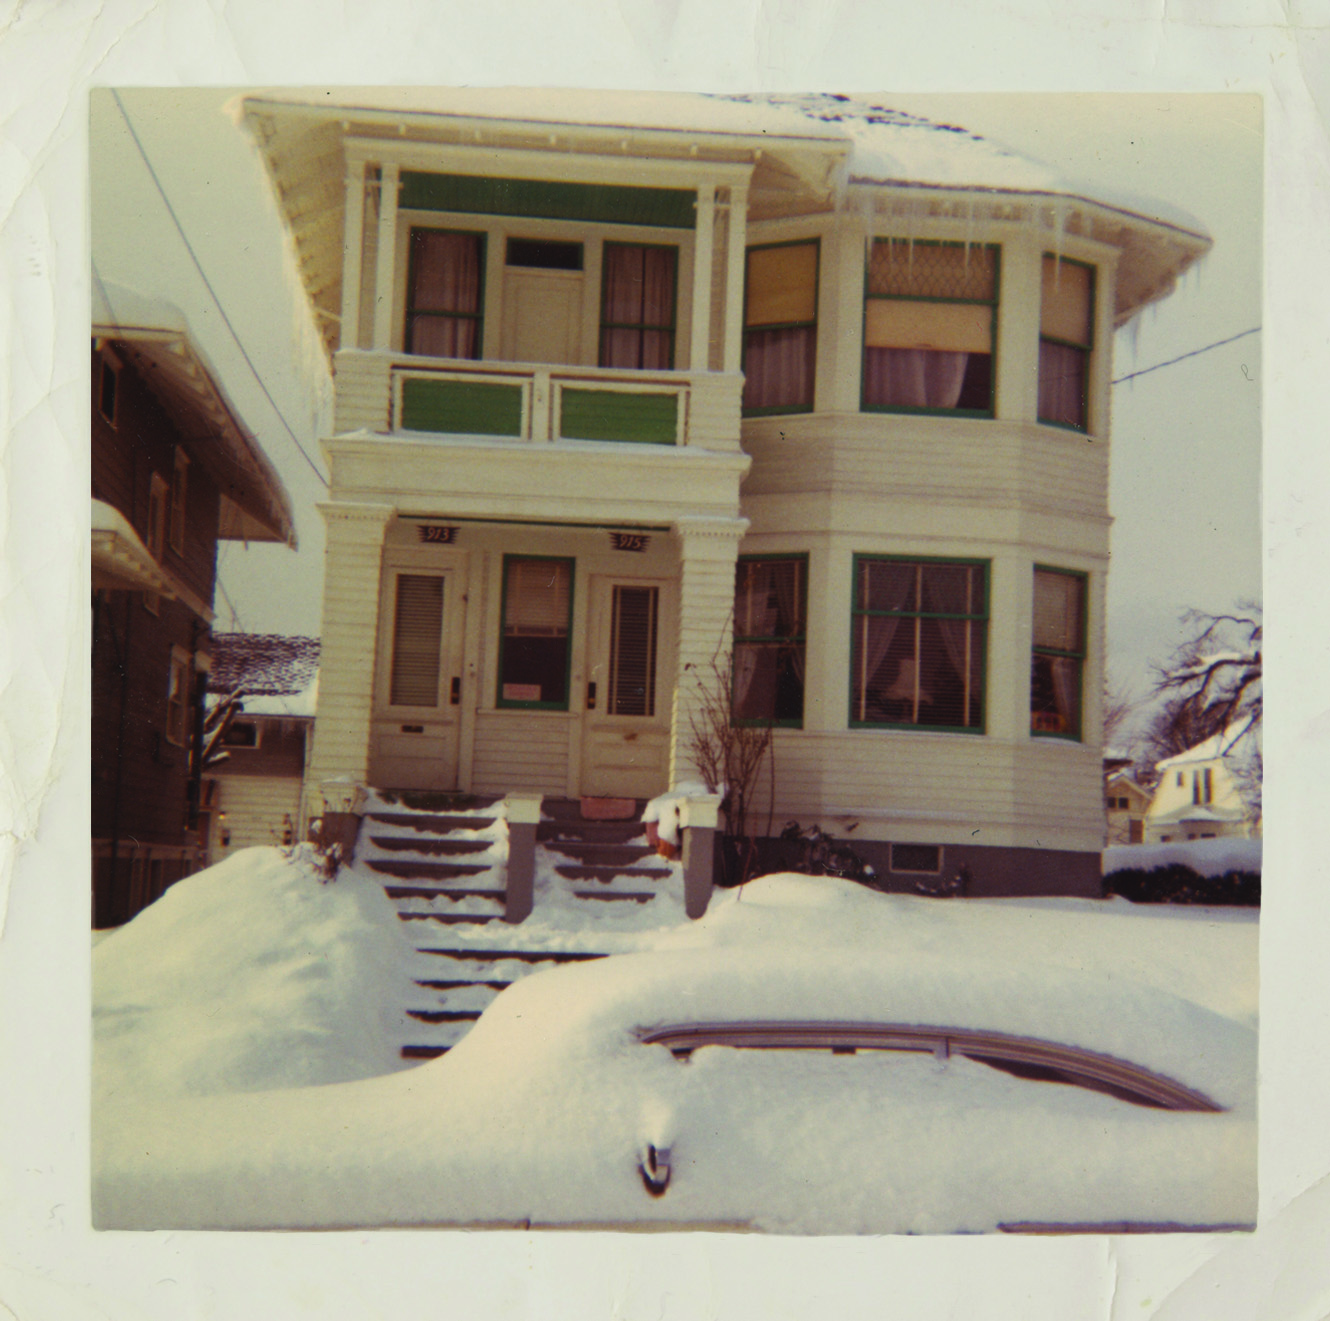 The house at 913-915 24th Ave. many years ago